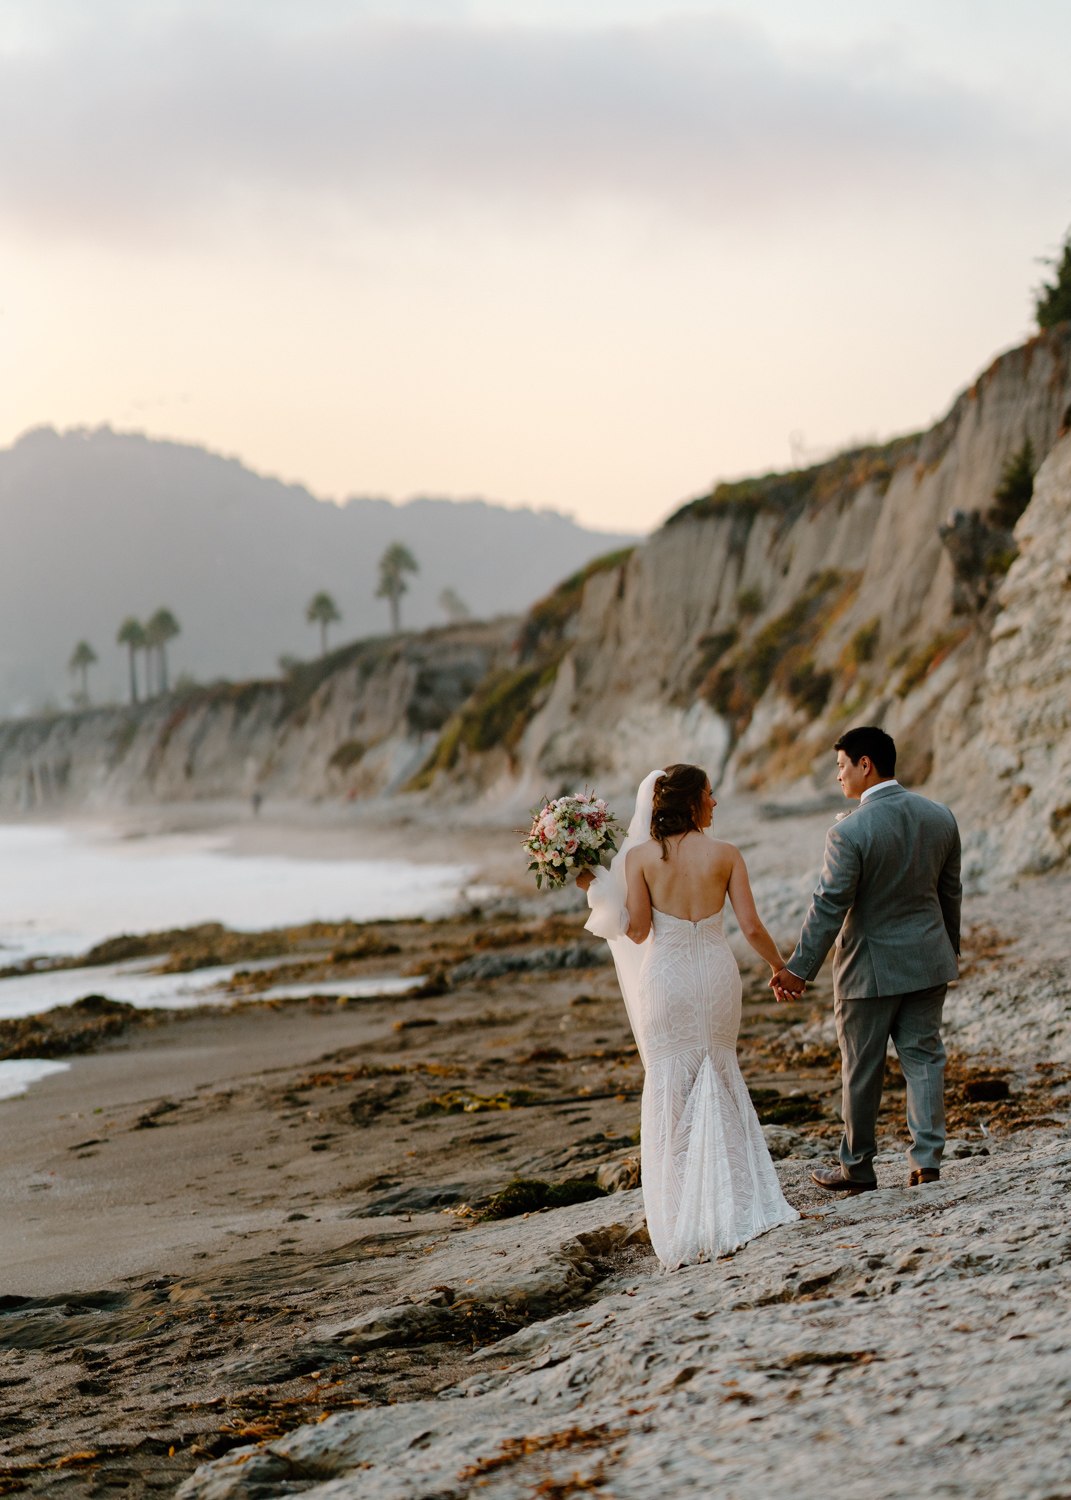 A wedding couple walking down the beach at sunset.